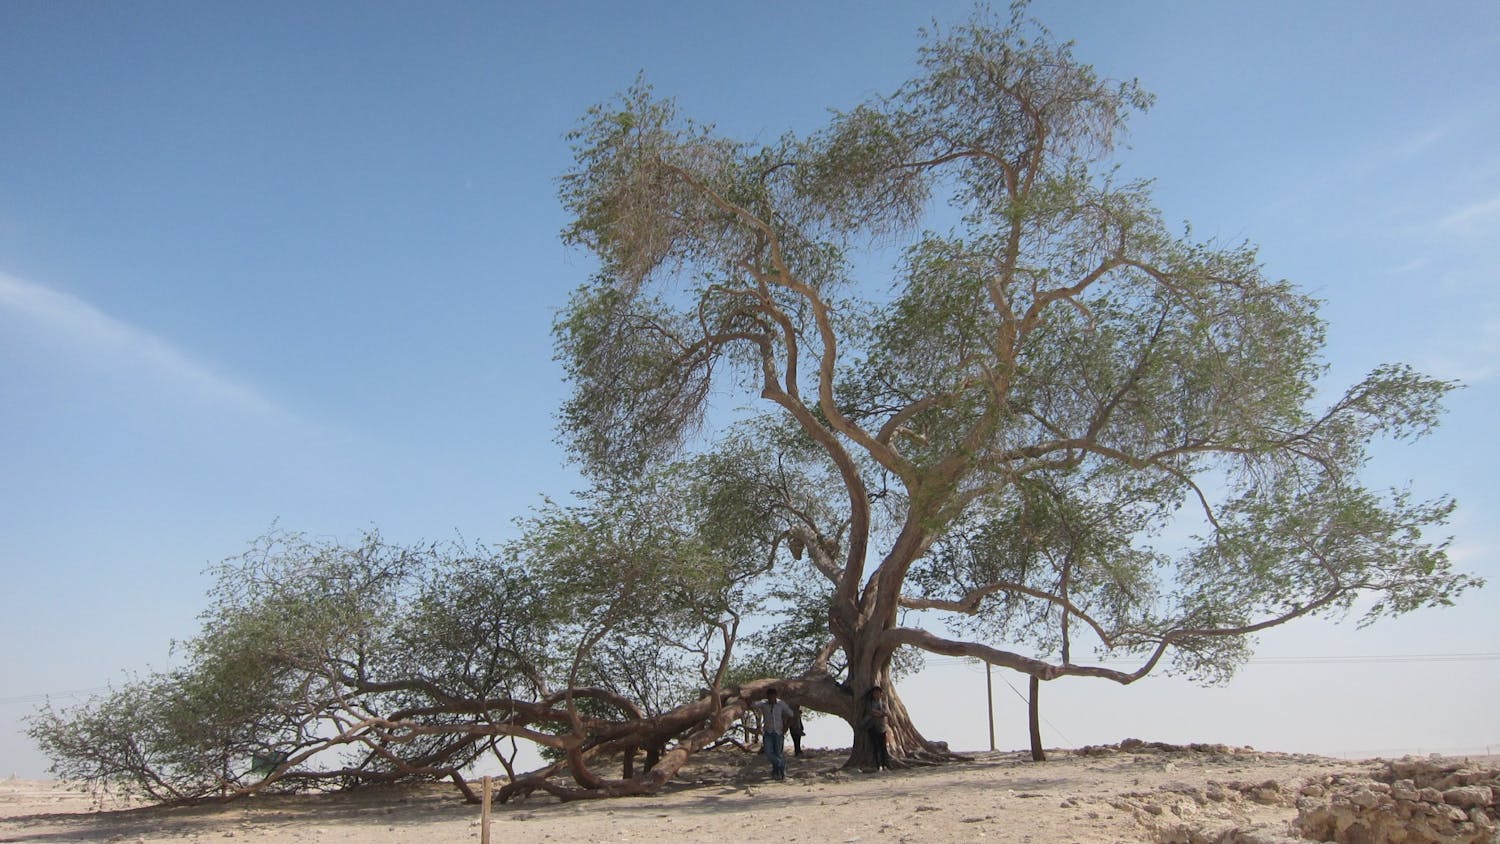 The Tree of Life is a staple attraction in Bahrain.